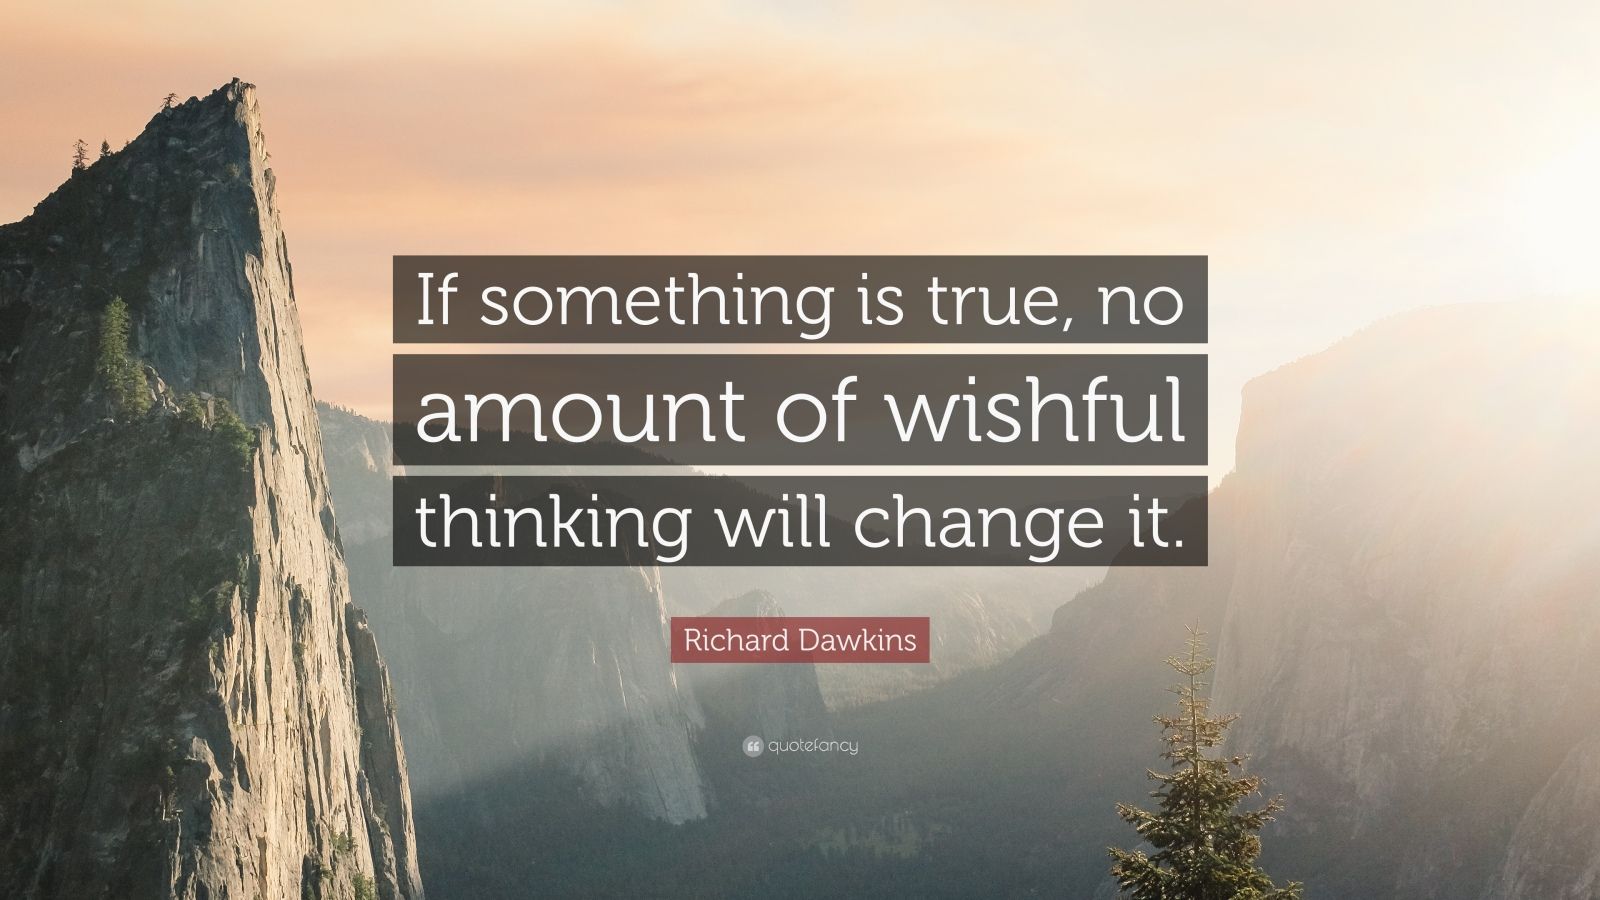 quote: "if something is true, no amount of wishful thinking will